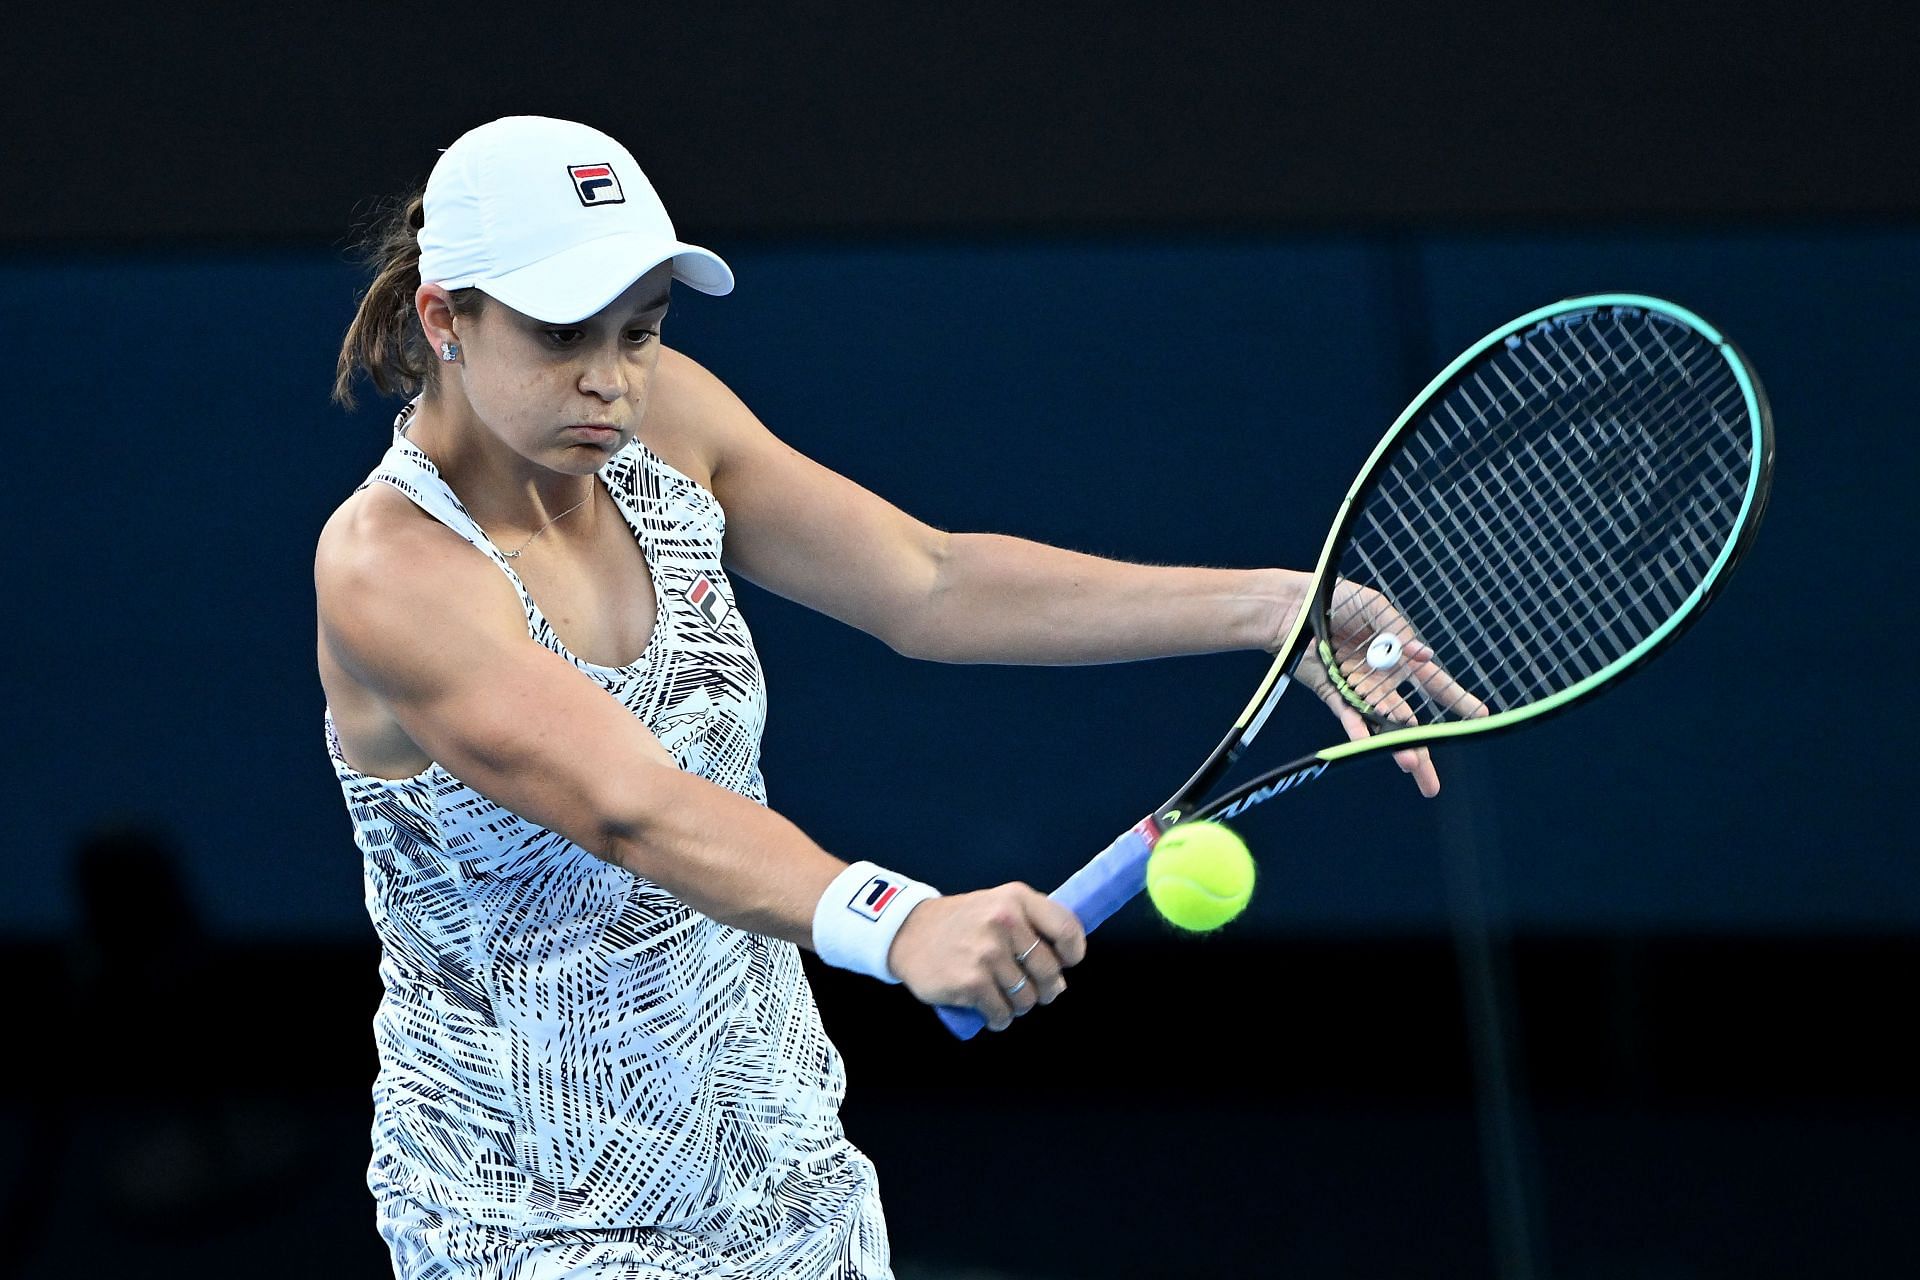 Ashleigh Barty squares off against Jessica Pegula in the quarterfinals of the 2022 Australian Open